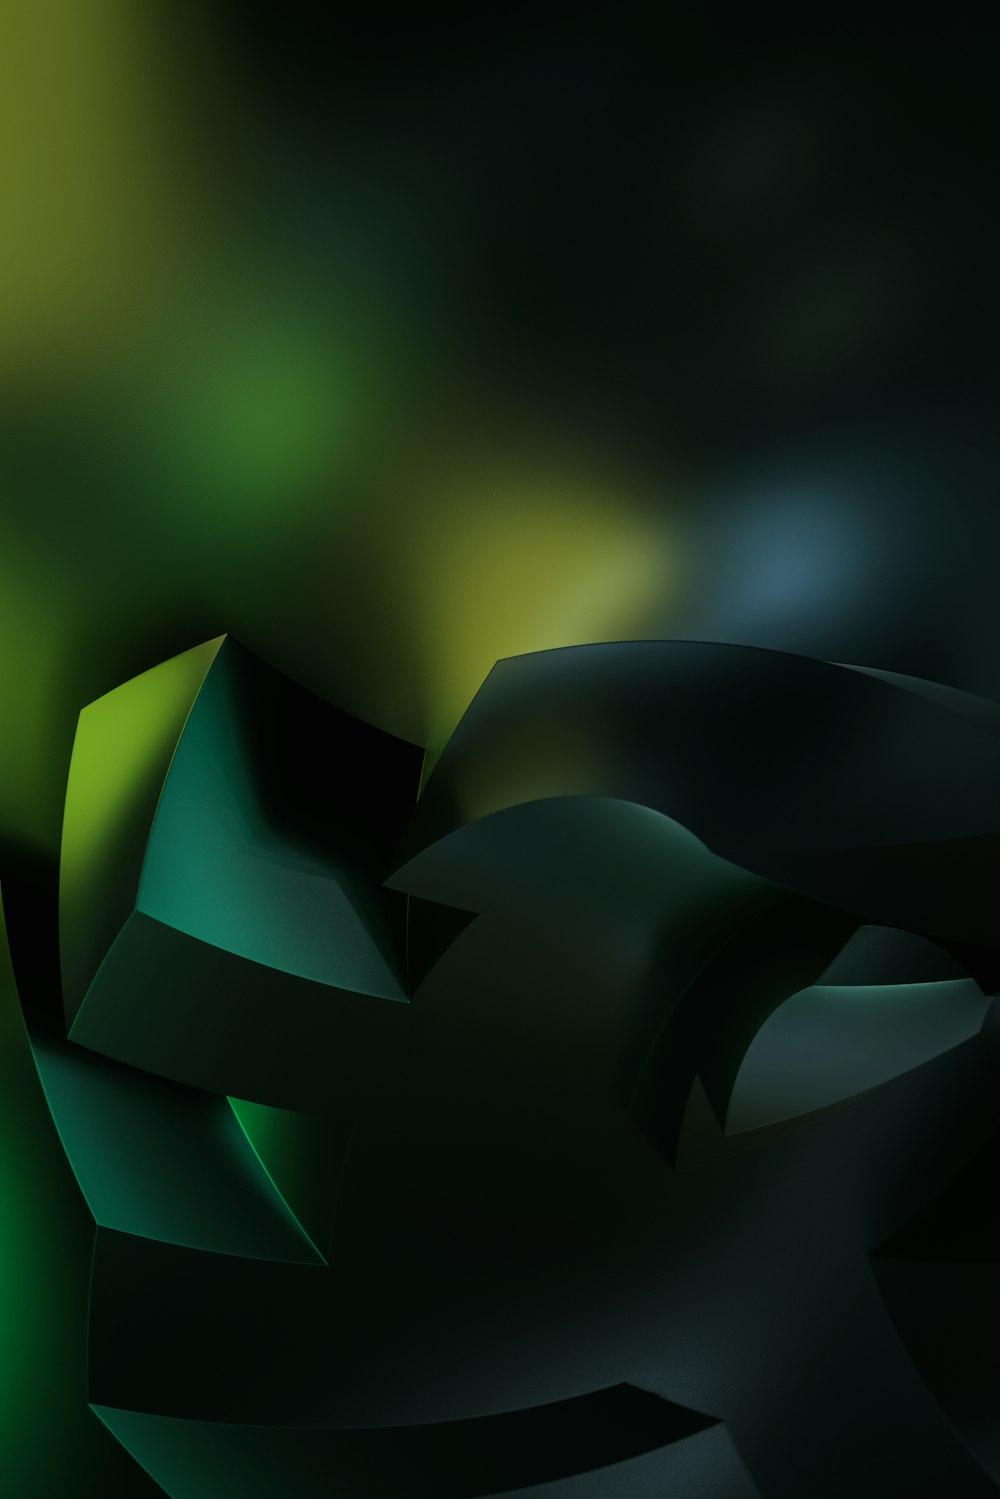 A Black And Green Abstract Background With Curves Photo